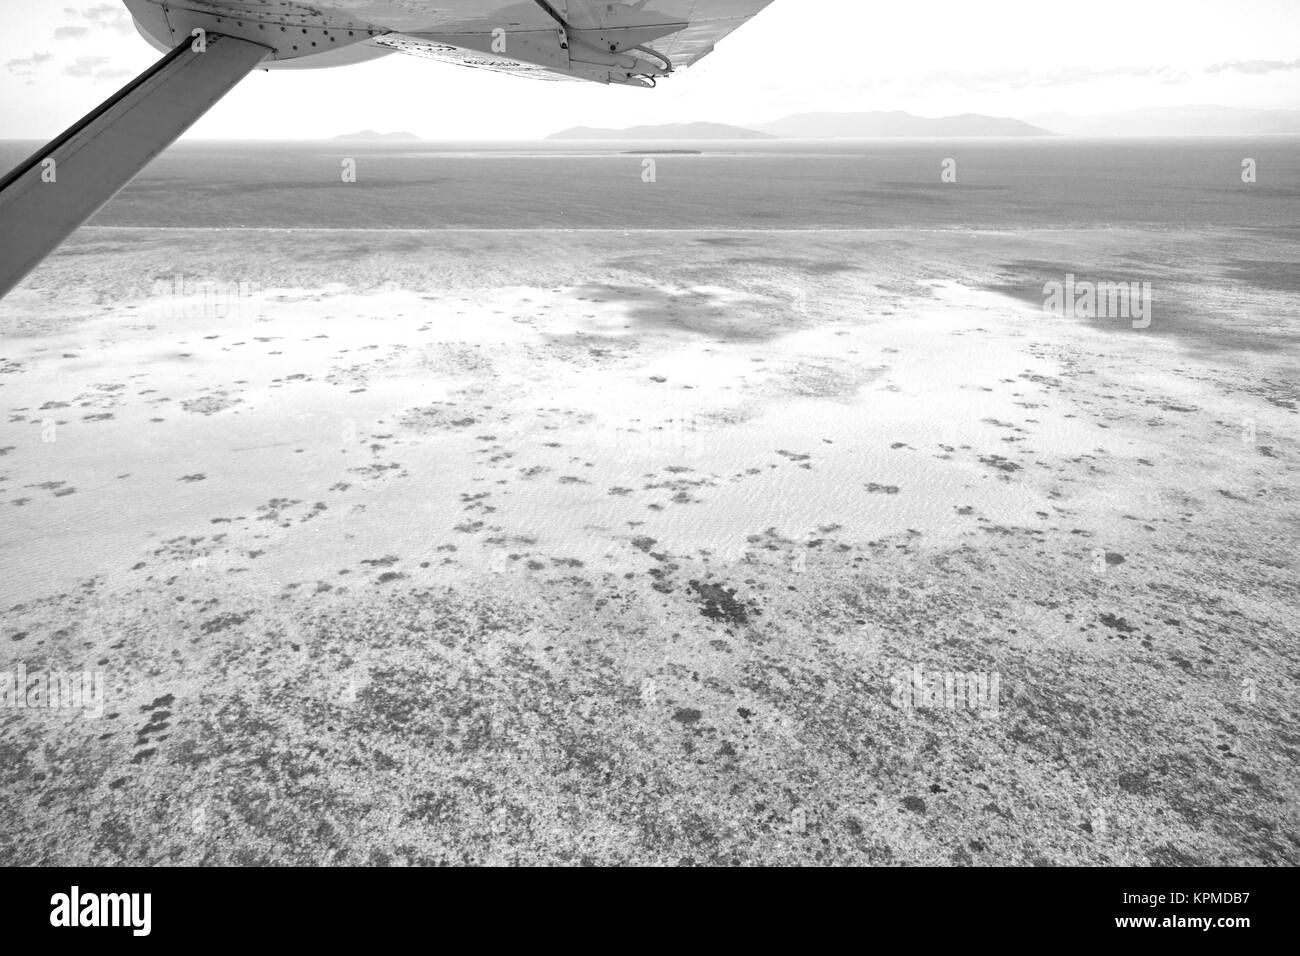 Cairns aerial Black and White Stock Photos & Images - Alamy